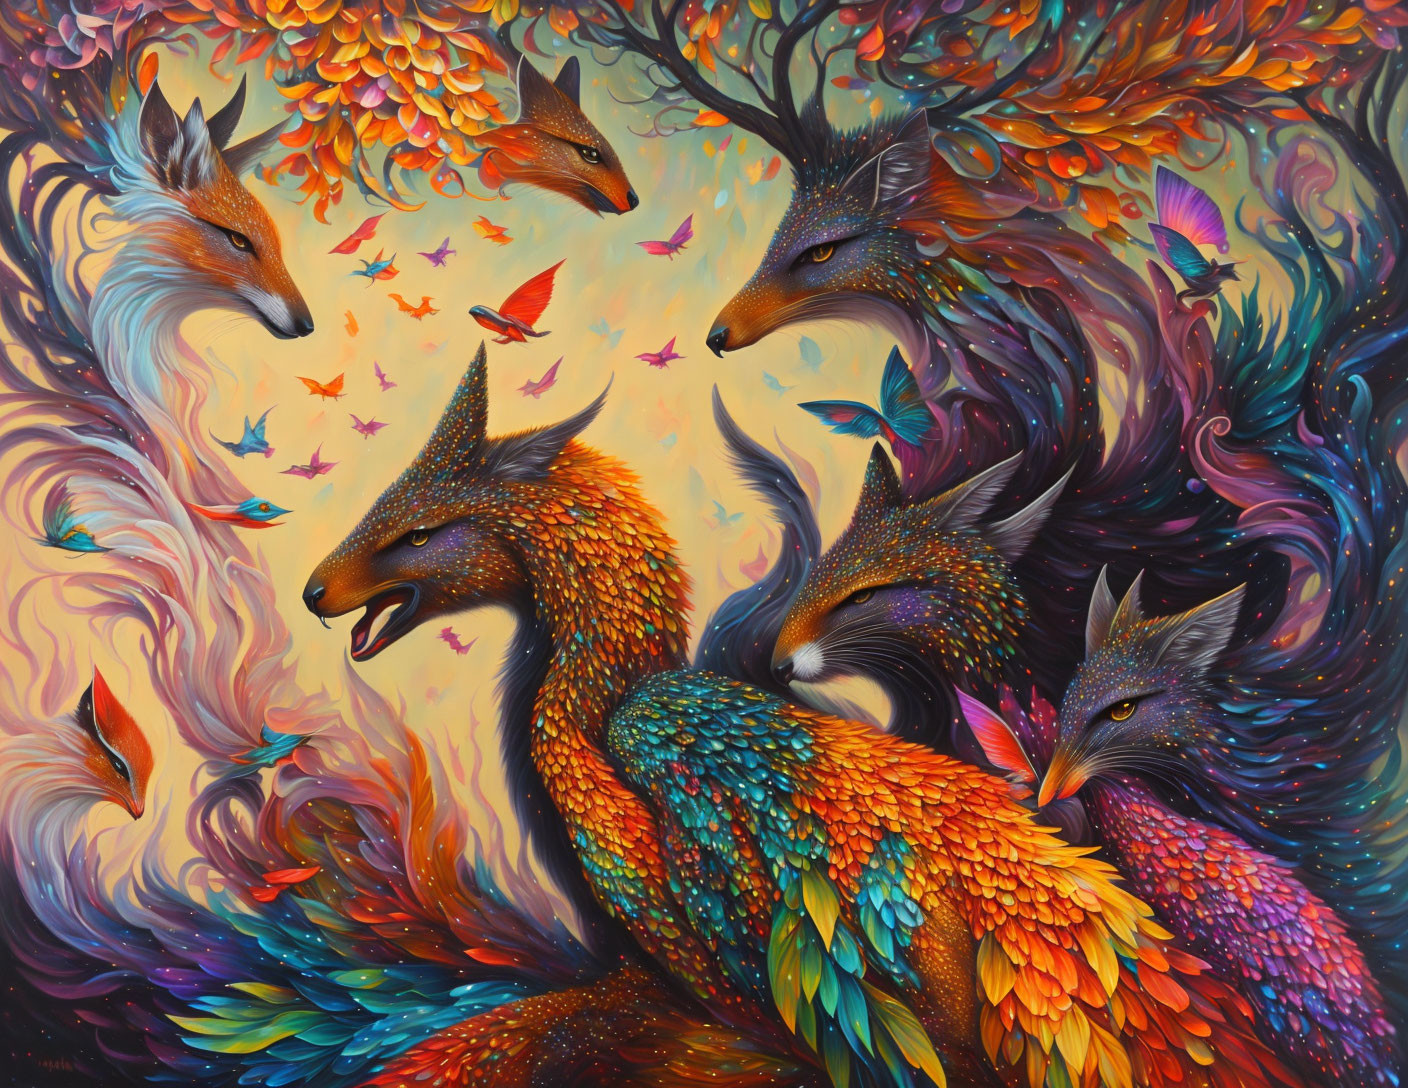 Colorful Painting of Stylized Foxes with Intricate Patterns and Butterflies